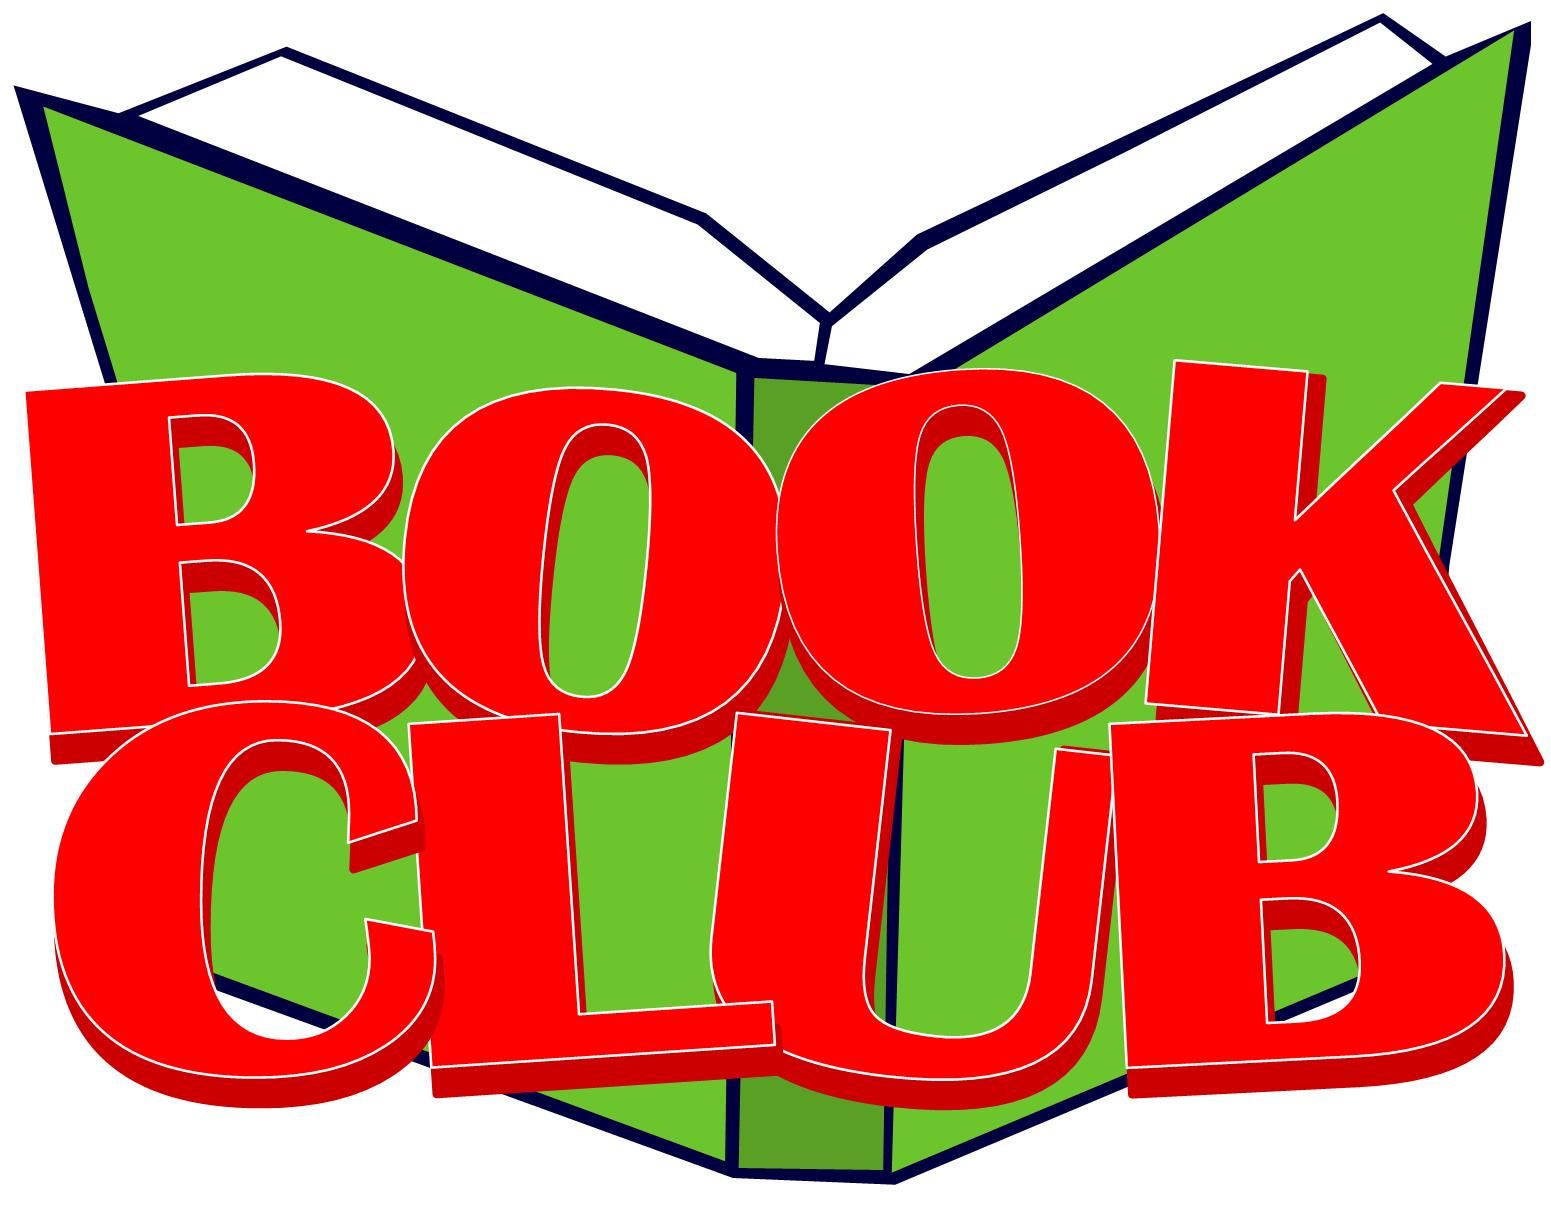 Illustration of a green book held open, with red text in front that says "Book Club."